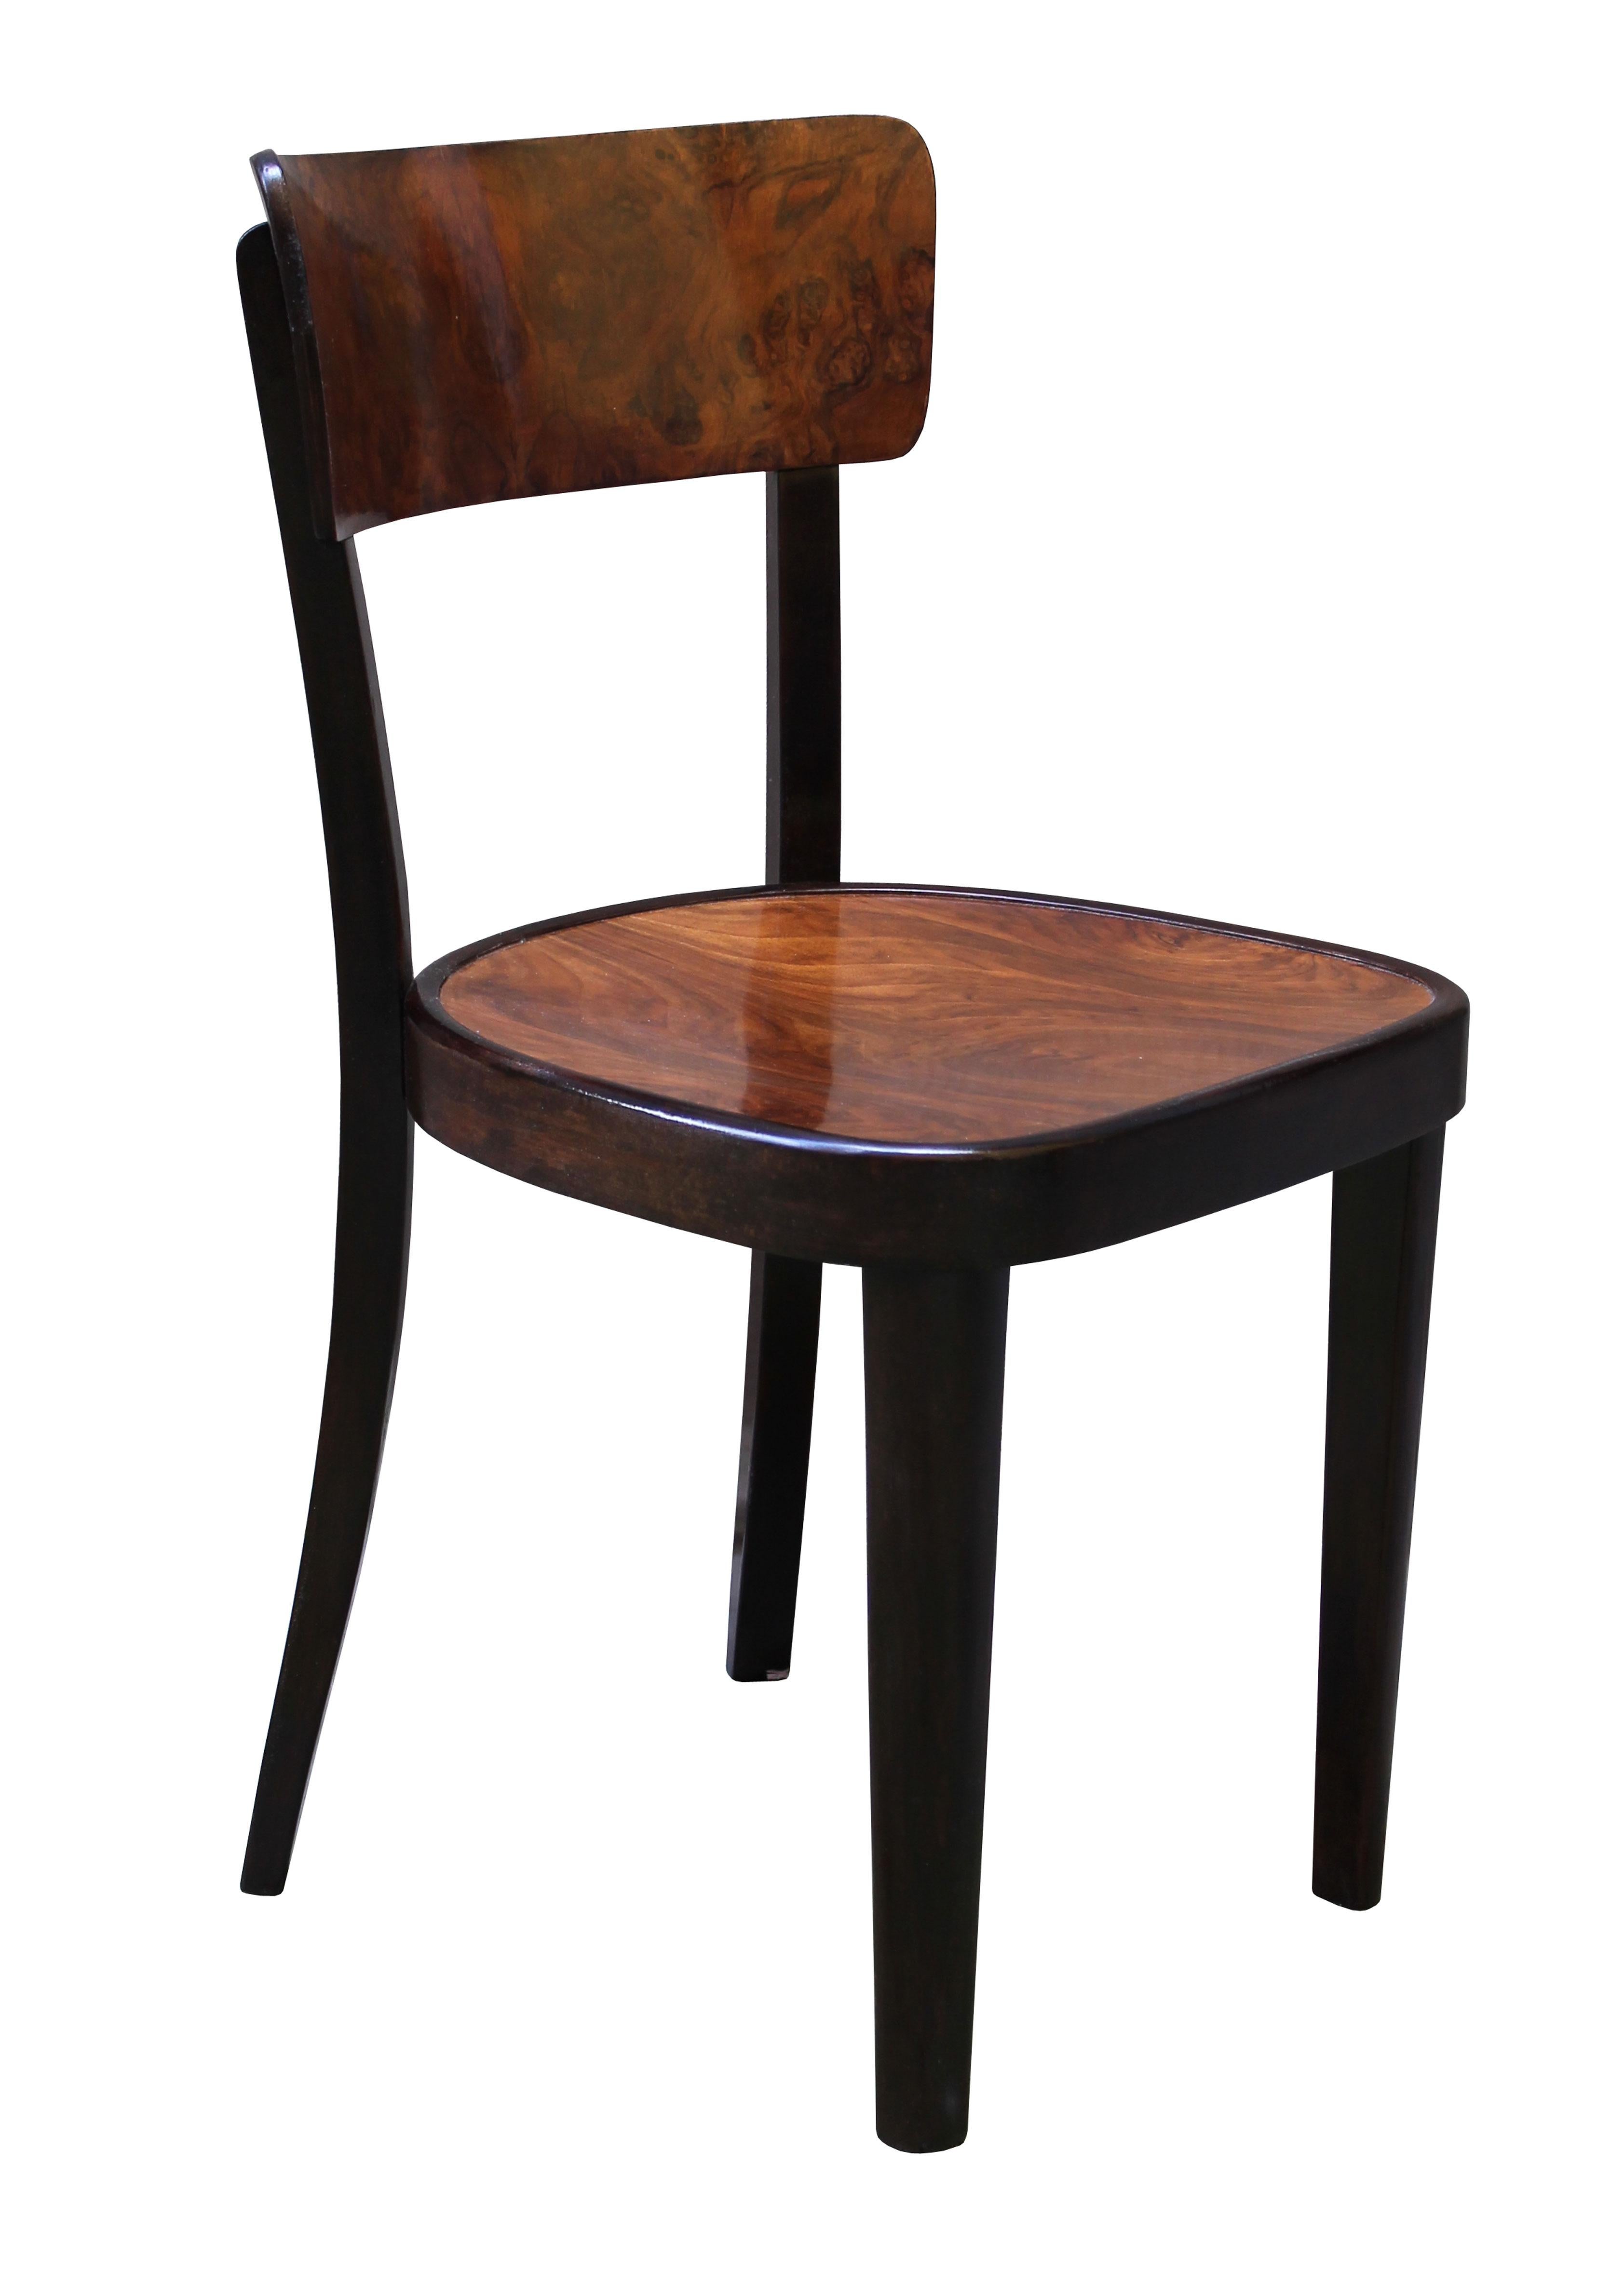 Czech Pair of 1930s Dining Chairs Model a 524 3/4 by Thonet For Sale